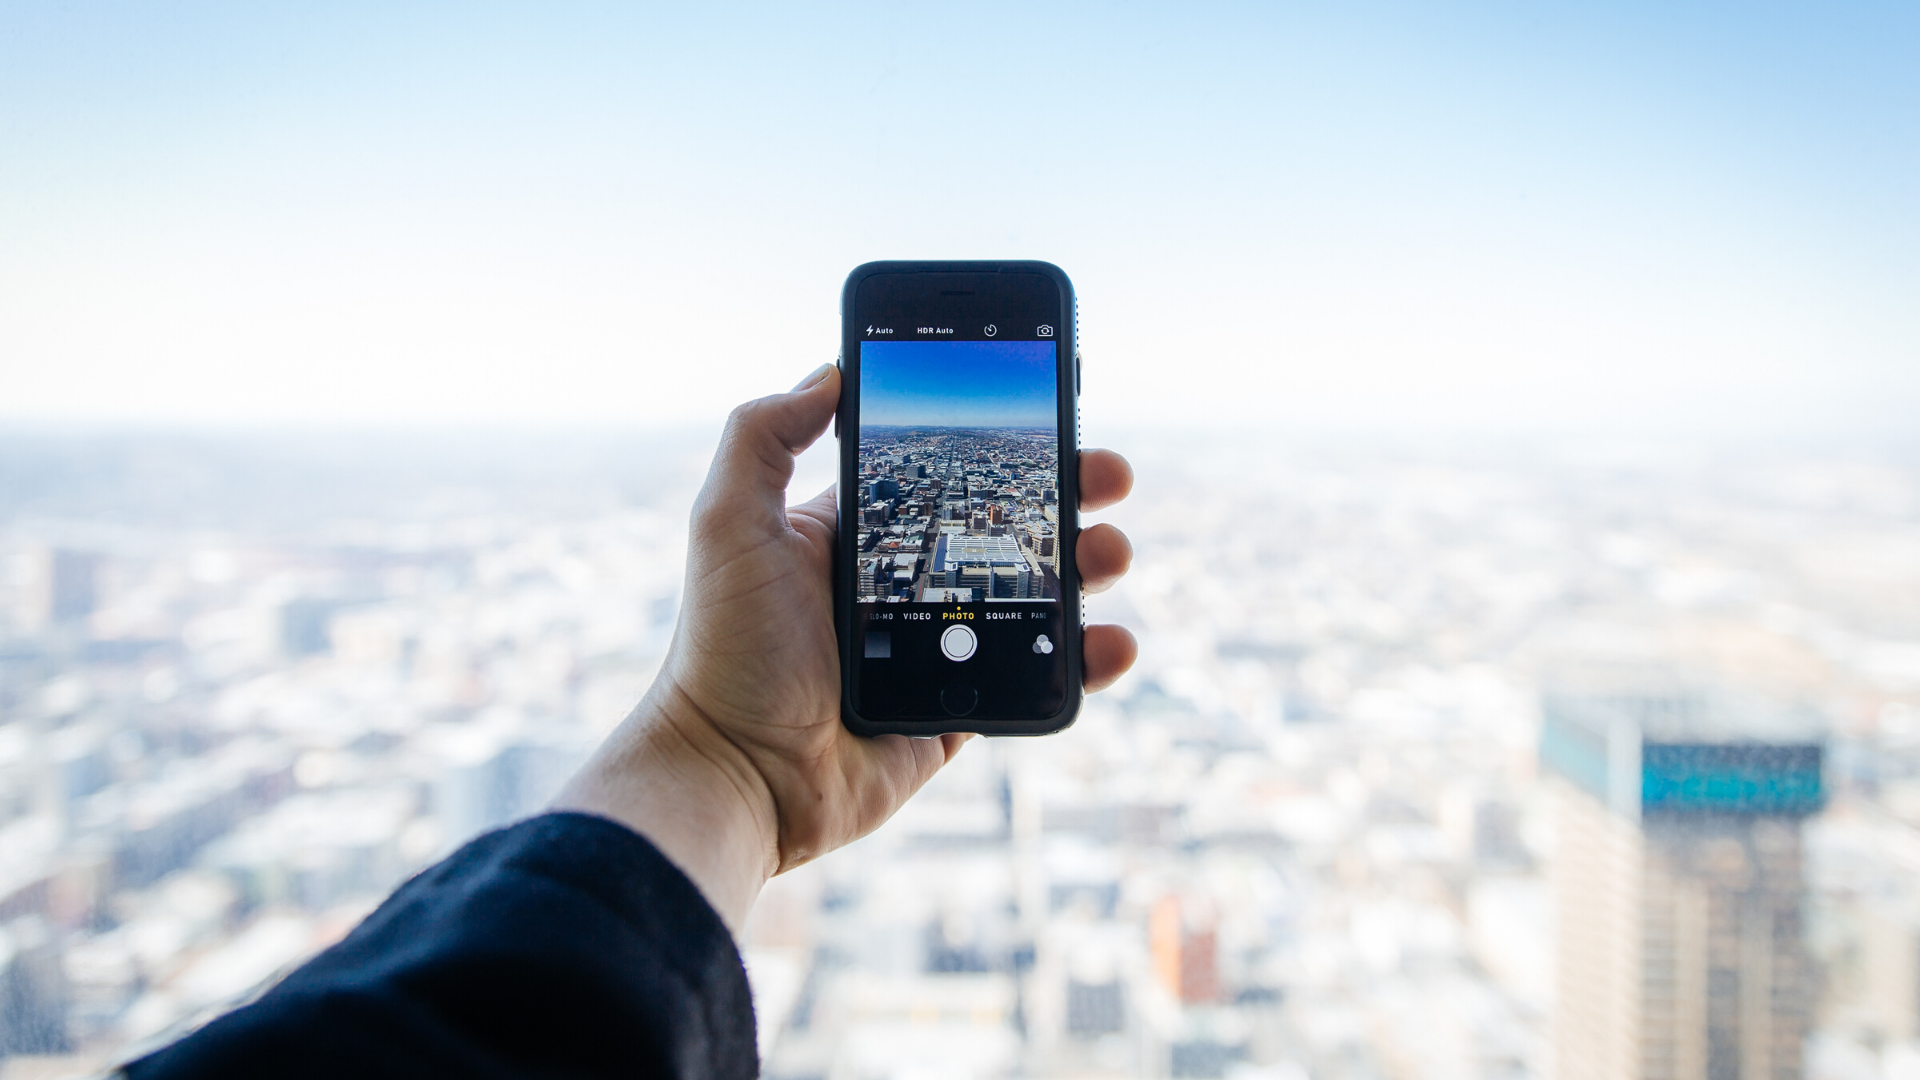 An iPhone camera overlooking a city